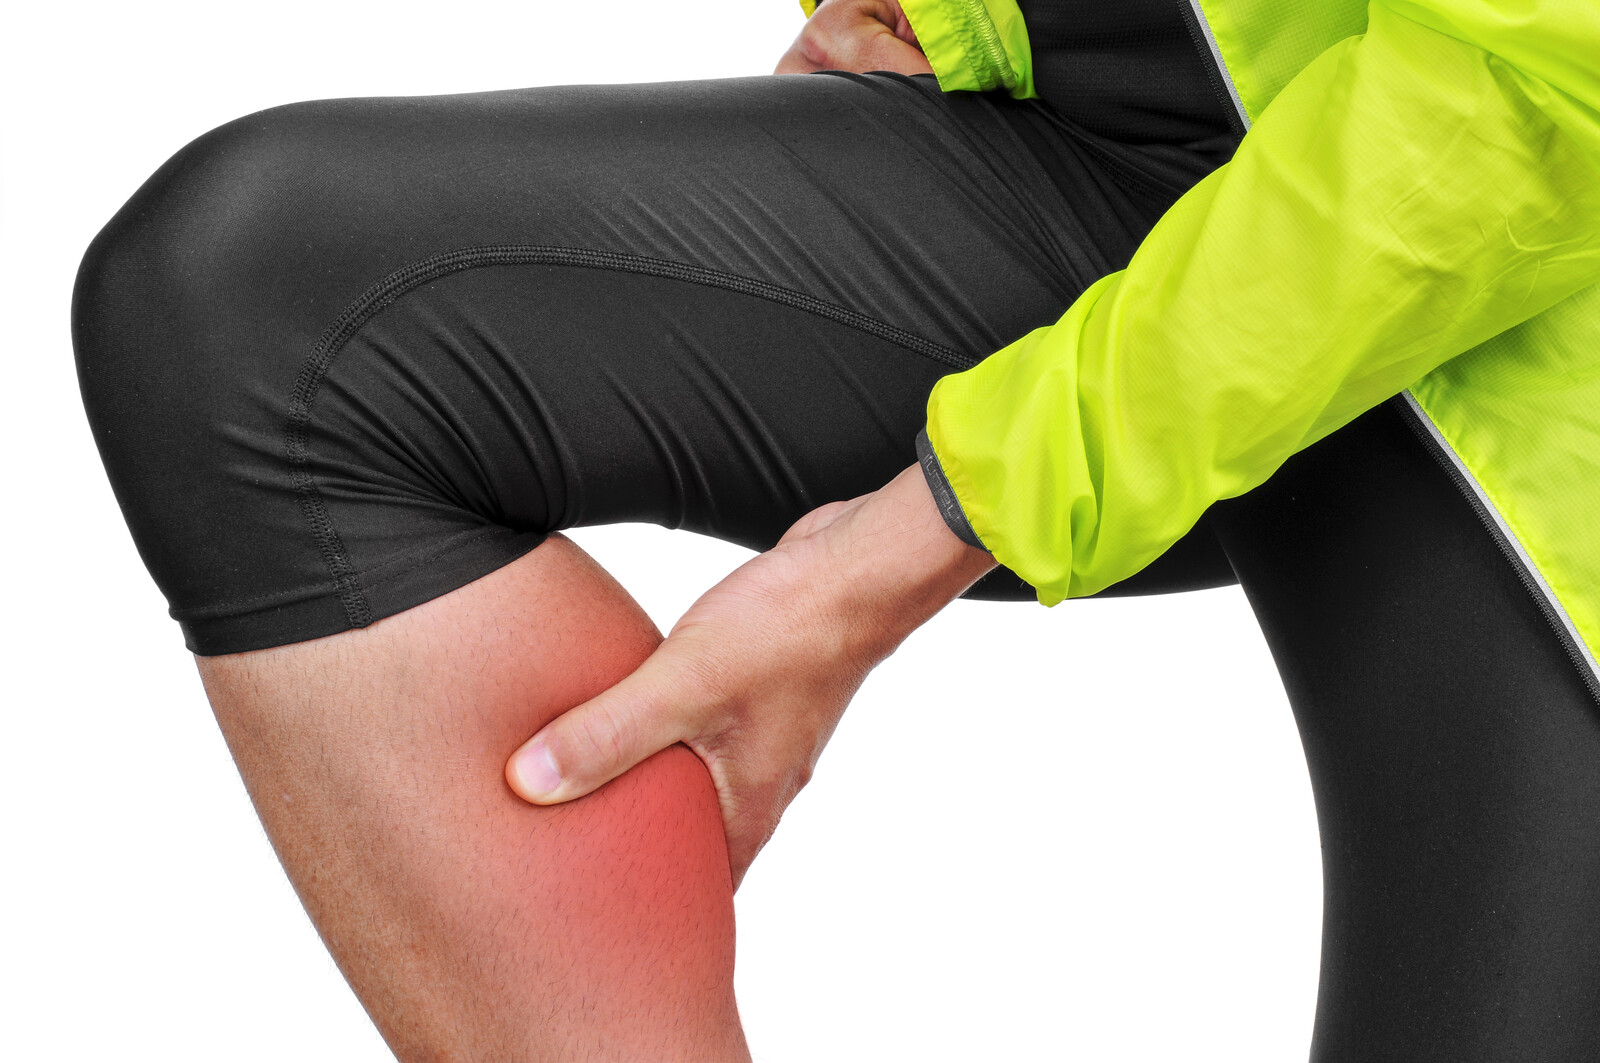 Covid restrictions and return to sport injuries!